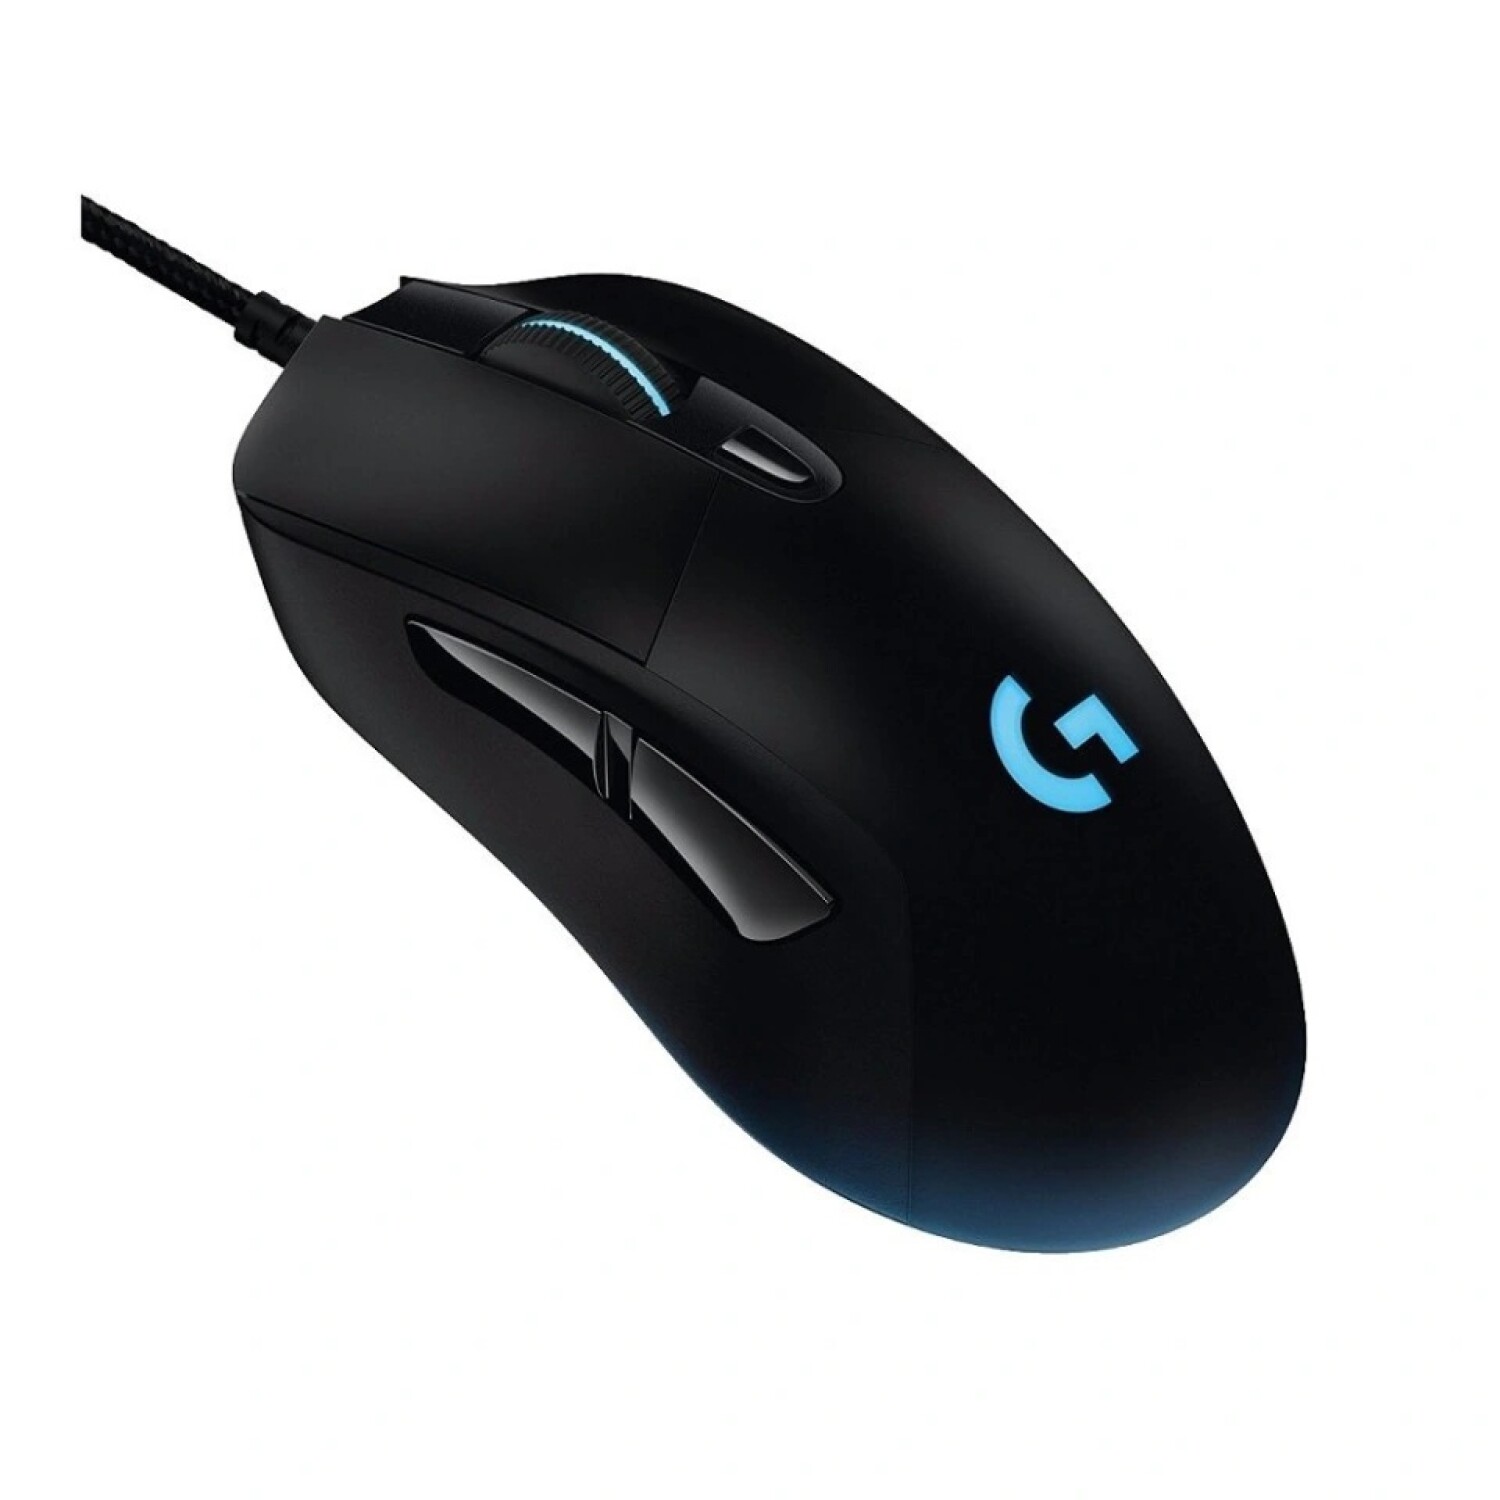 Logitech G403 Antgrip • Antgrip - Upgrade your gaming mouse.